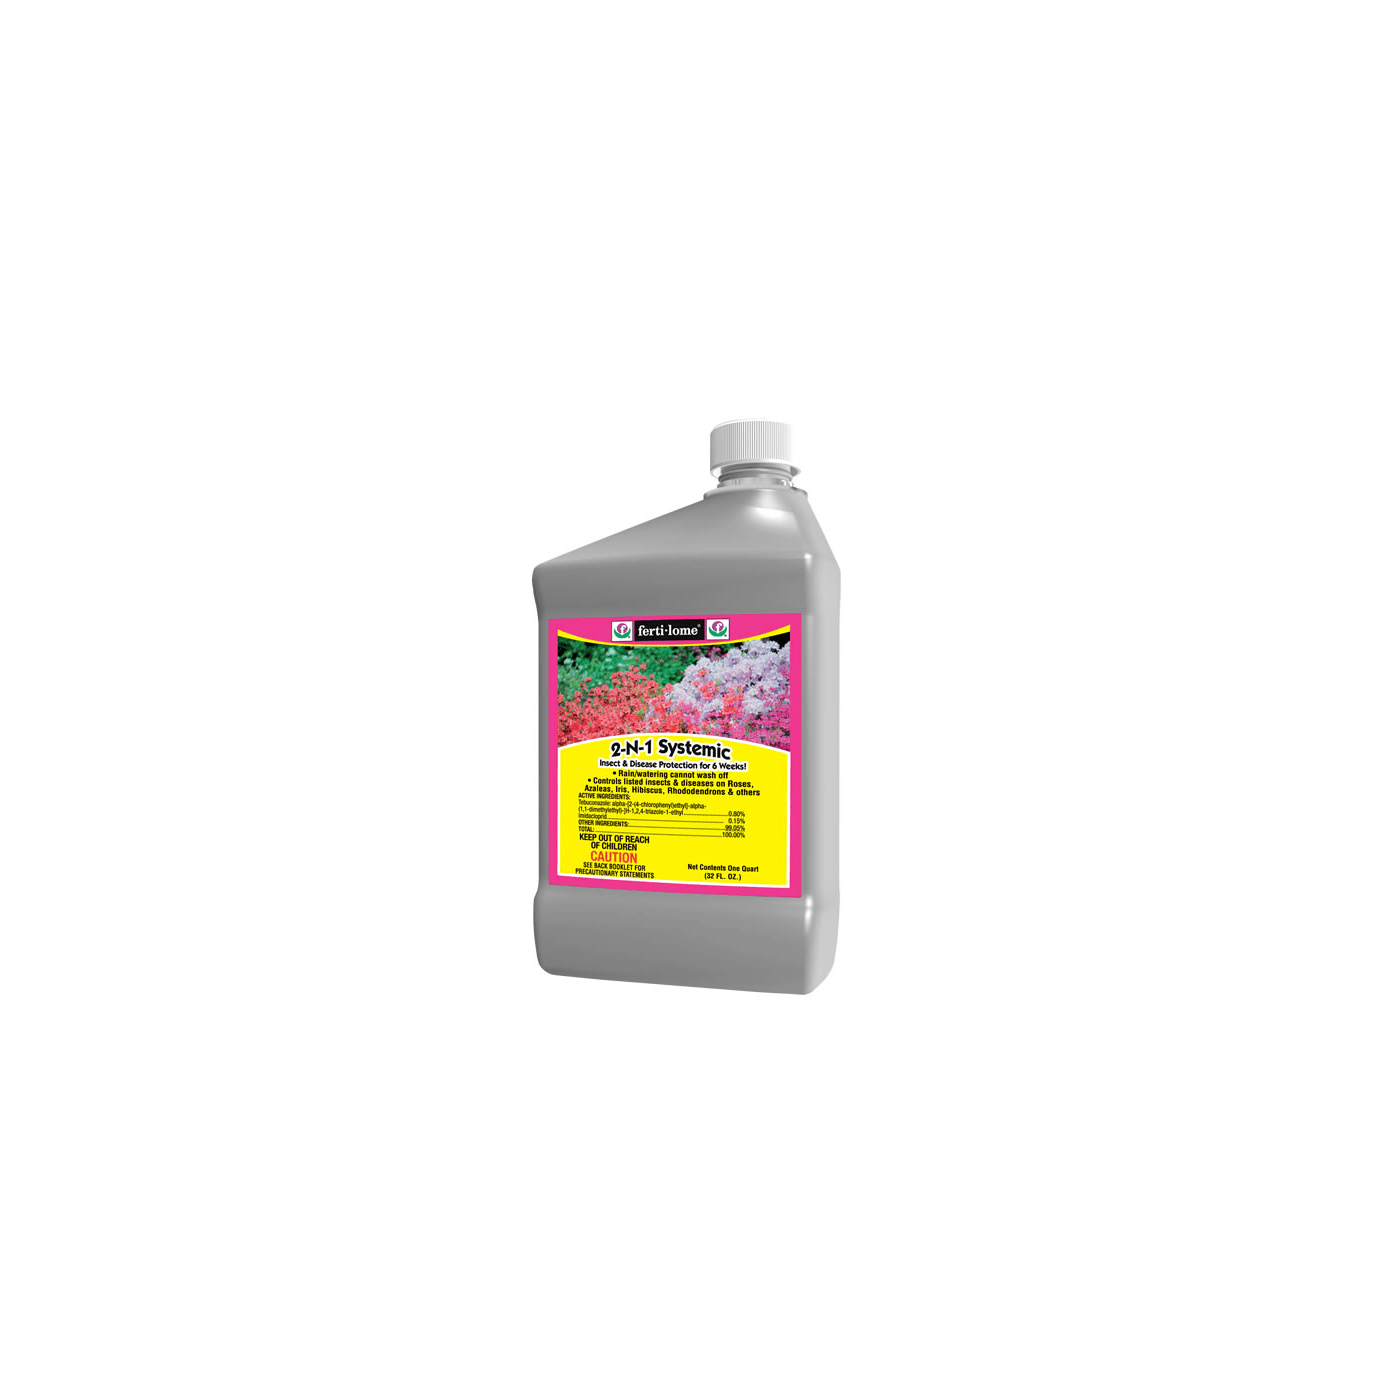 Fertilome's 2-N-1 Systemic Insecticide -Qt Concentrate